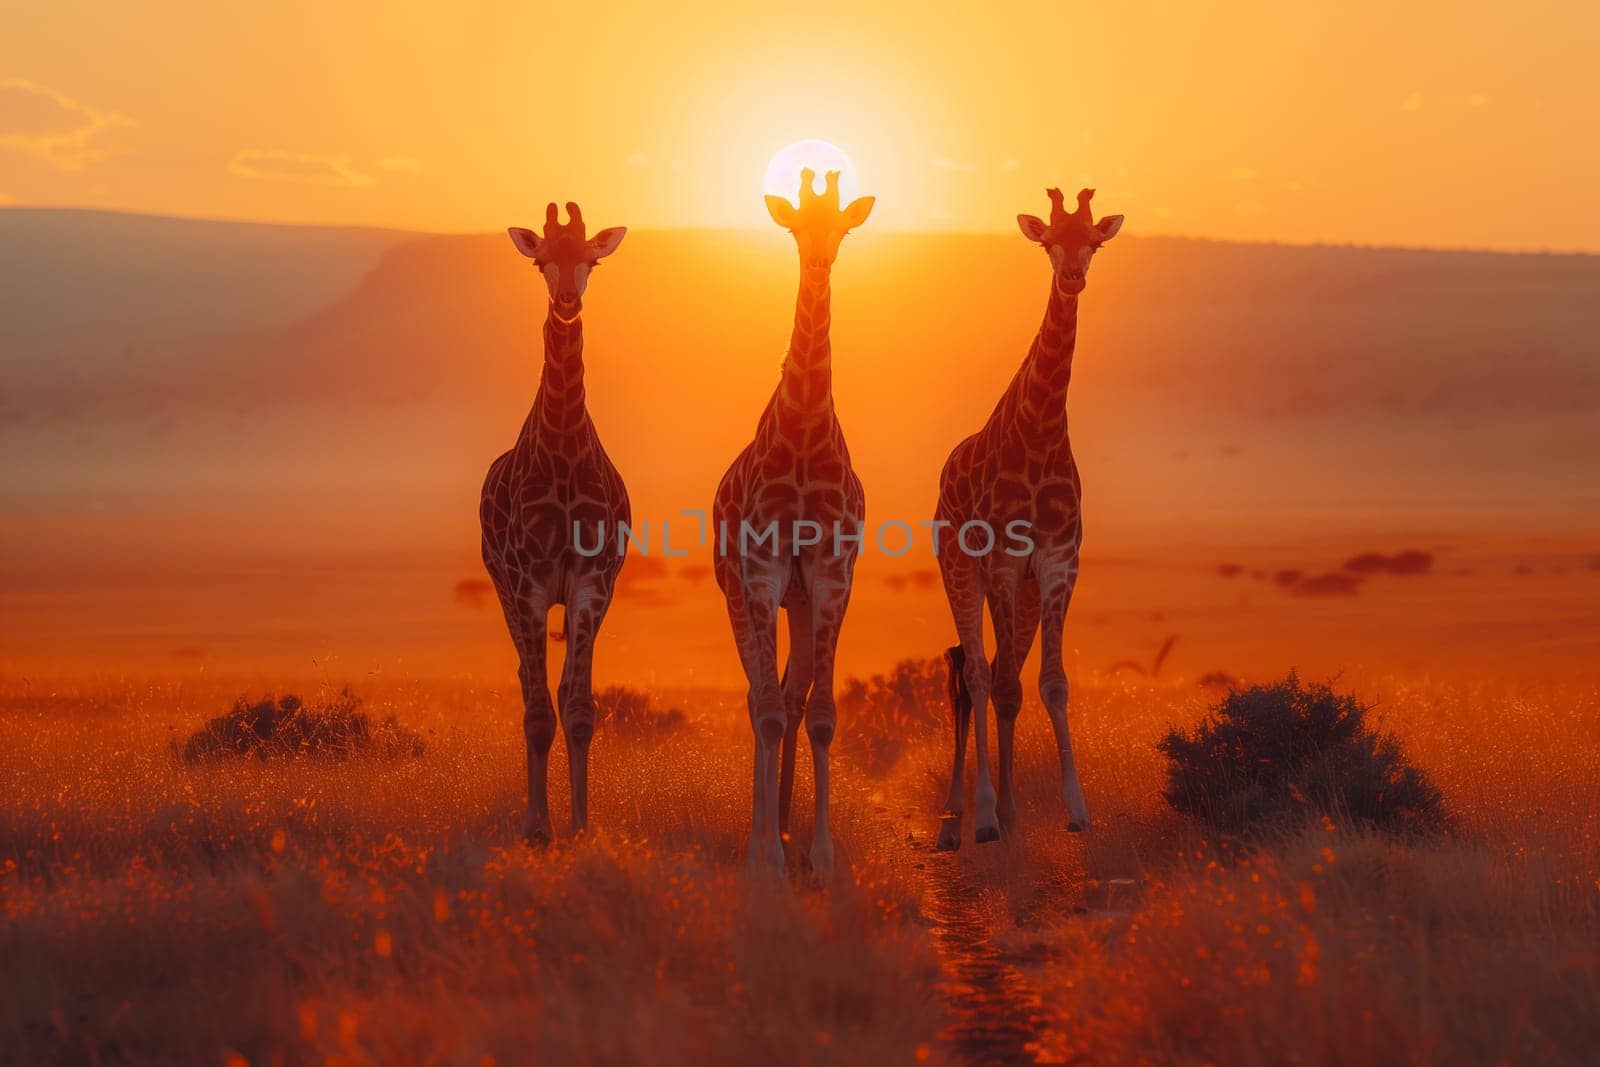 Three giraffes graze in a grassland at sunset, under the colorful sky by richwolf